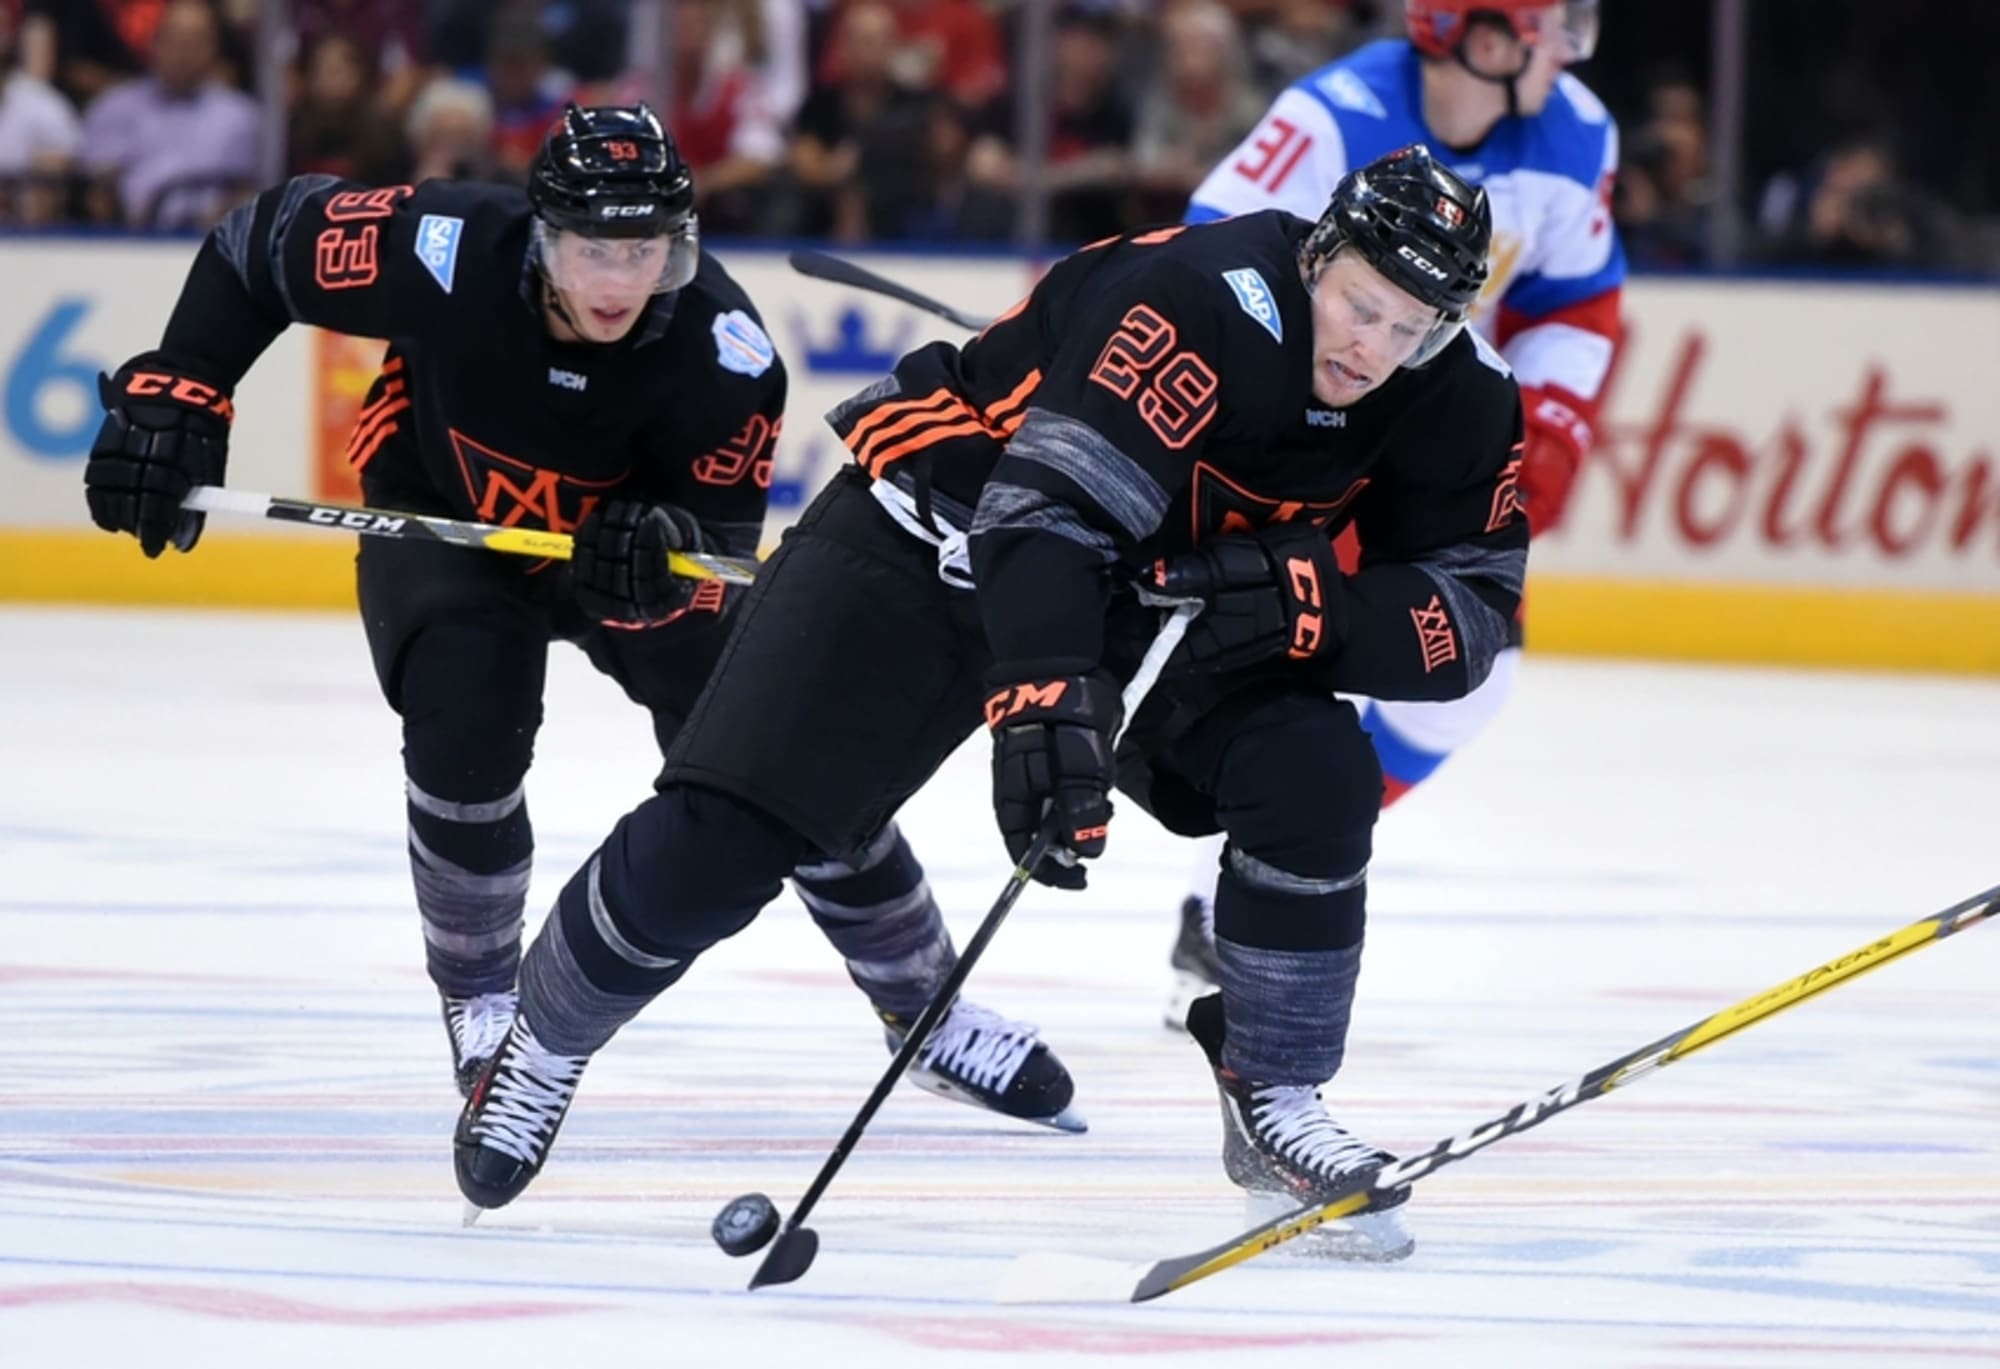 Matthews scores as North America loses to Russia at World Cup of